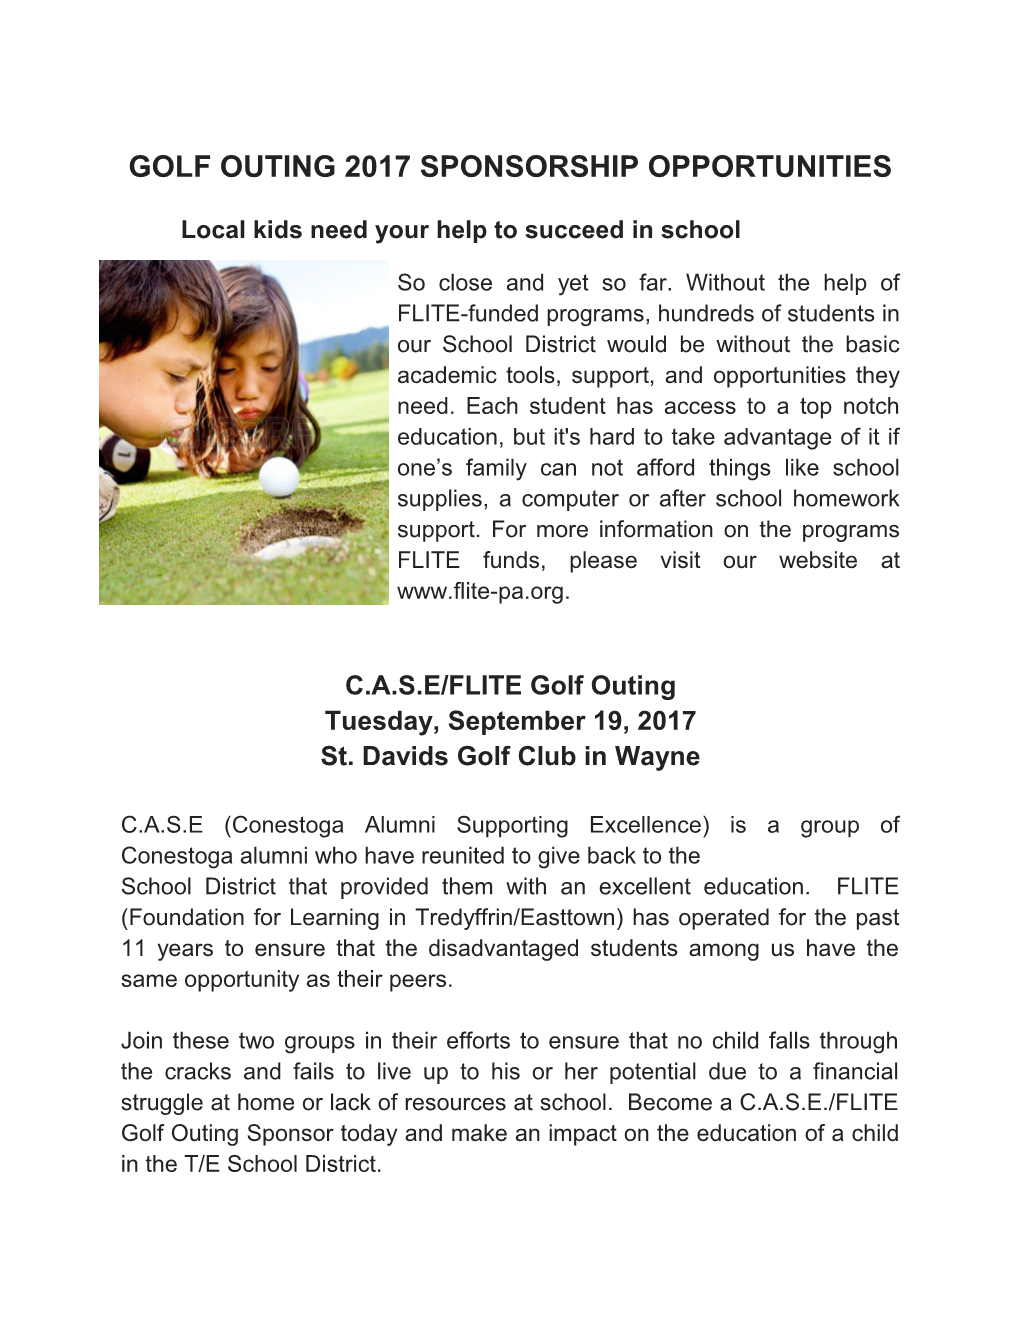 Golf Outing 2017 Sponsorship Opportunities